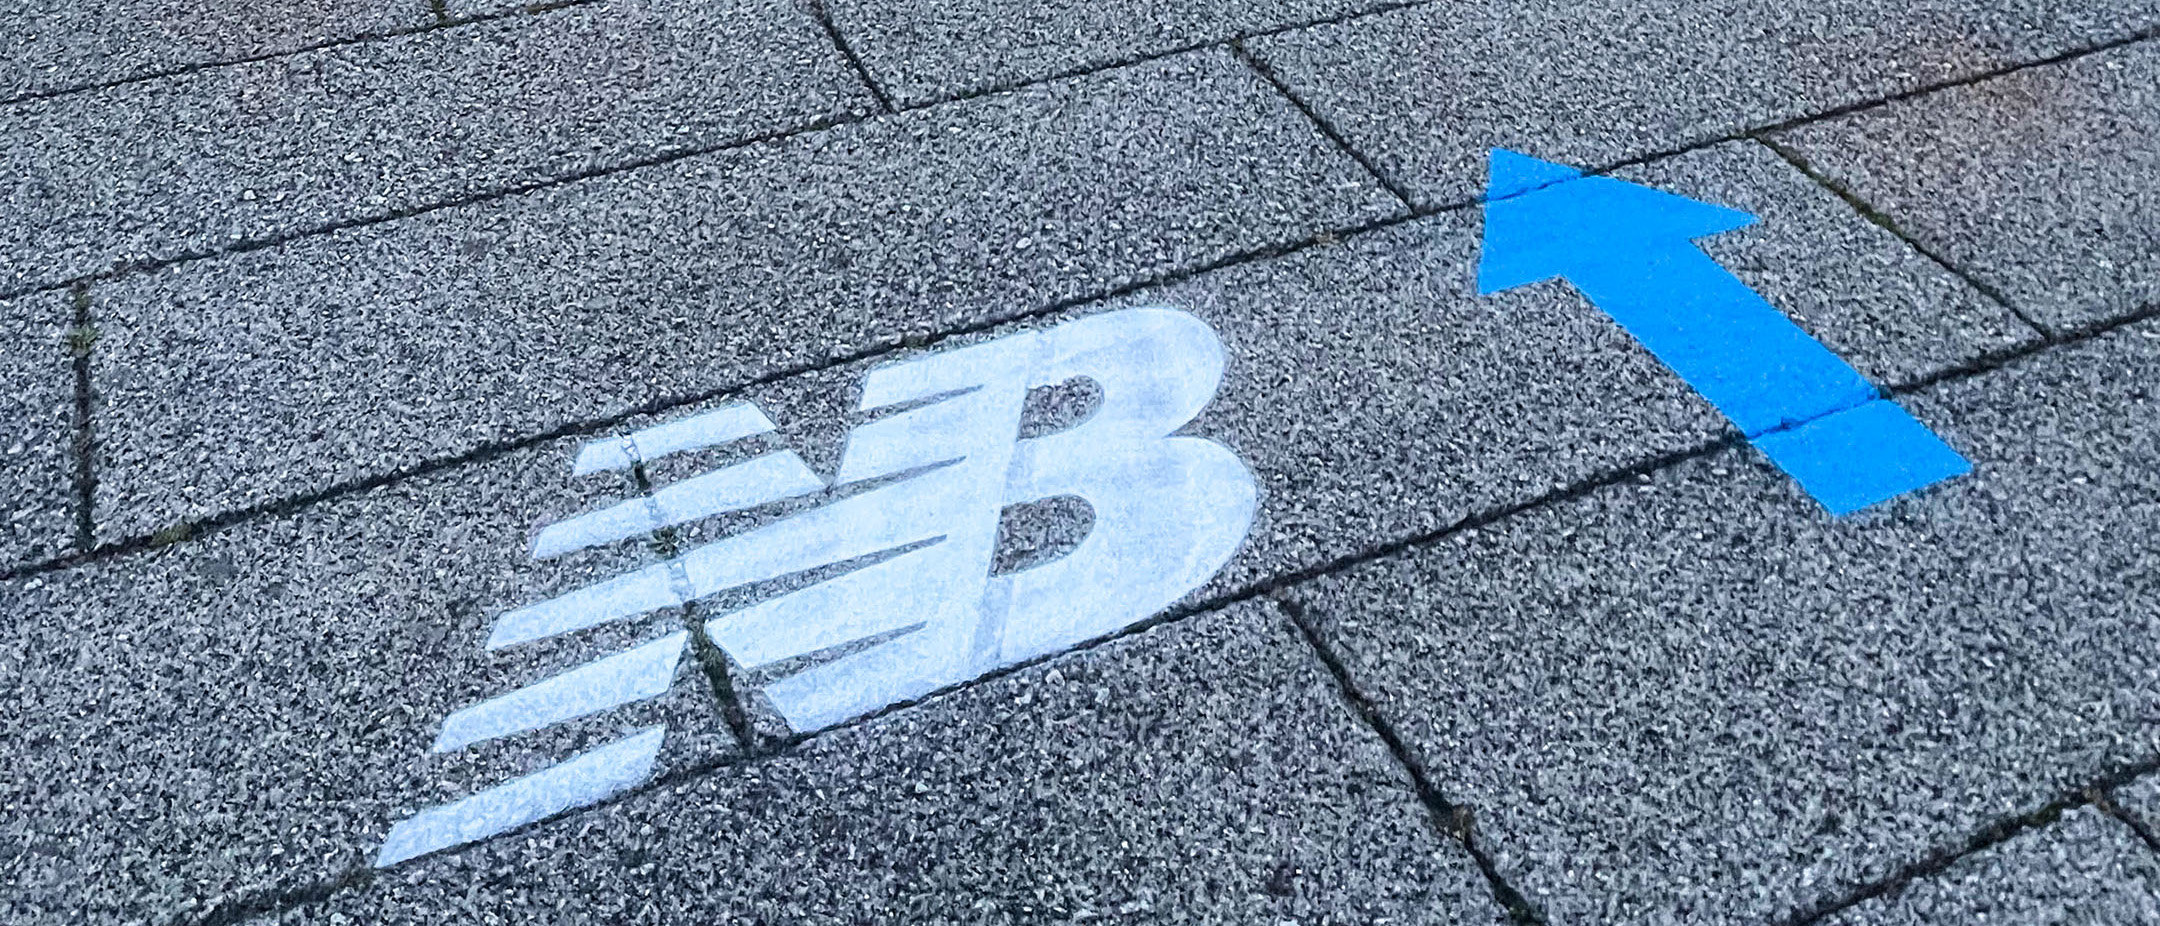 New Balance logo and blue arrow clean graffitied onto the pavement